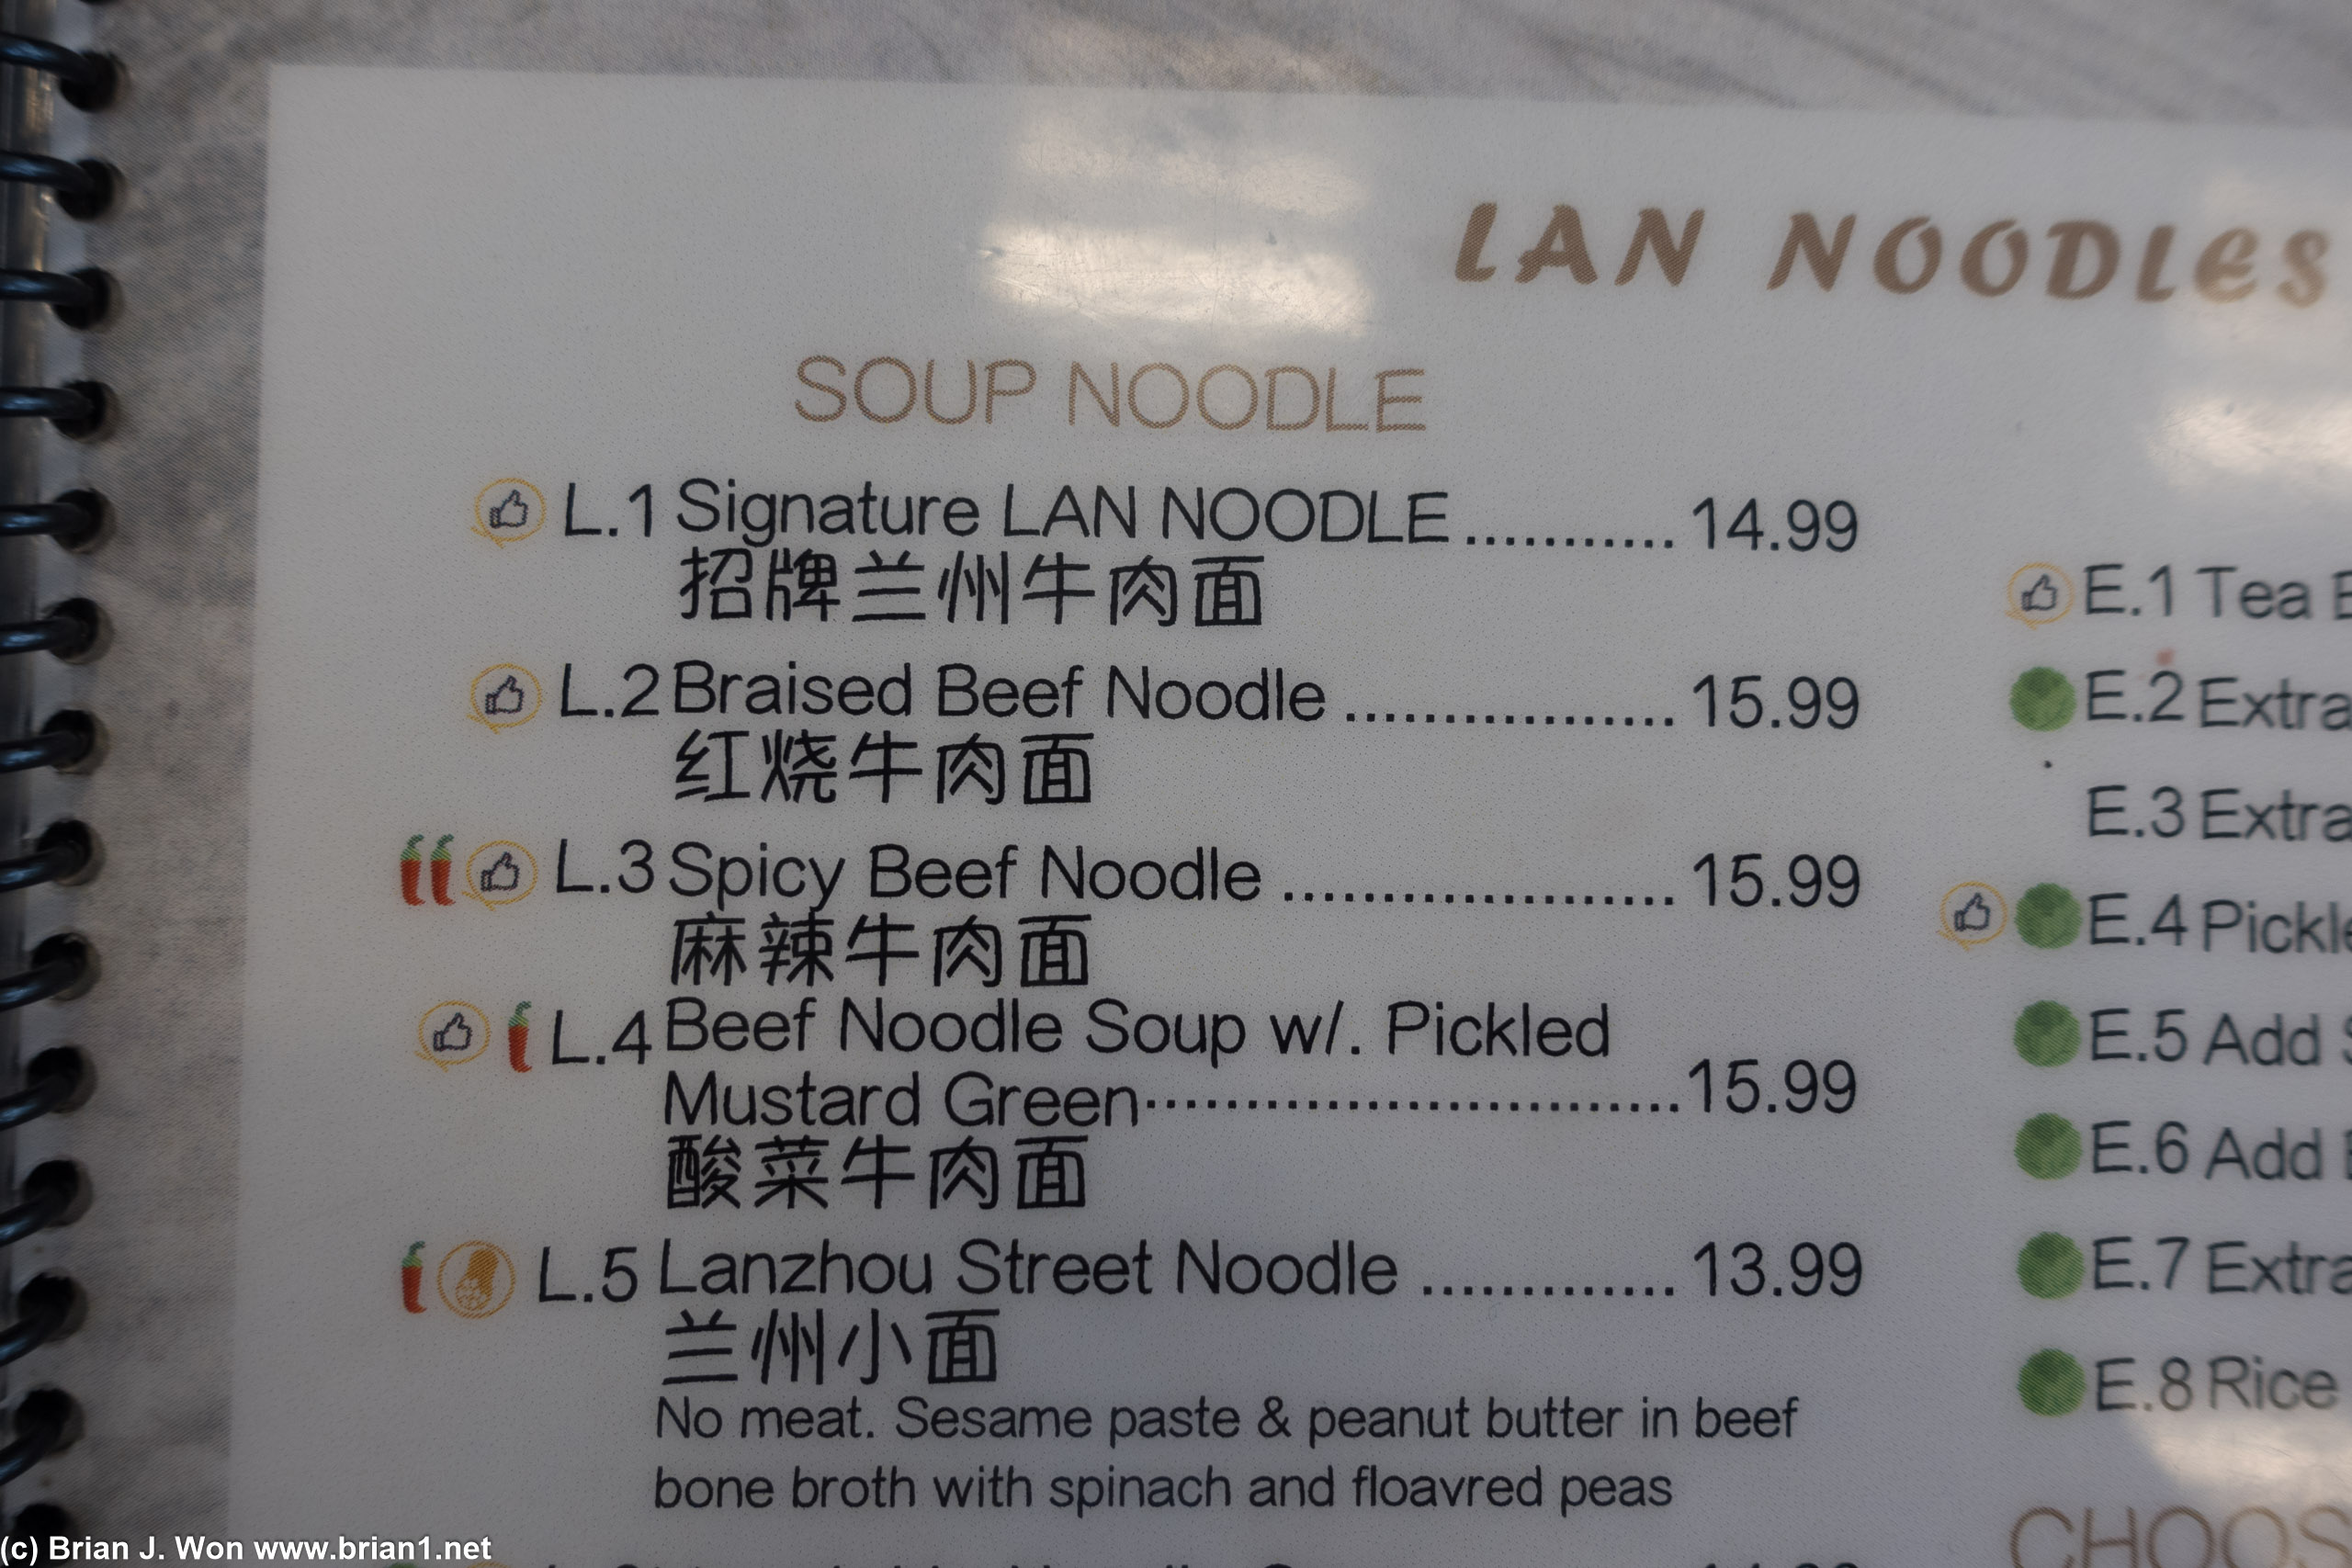 Signature LAN NOODLE appears to be a good choice.